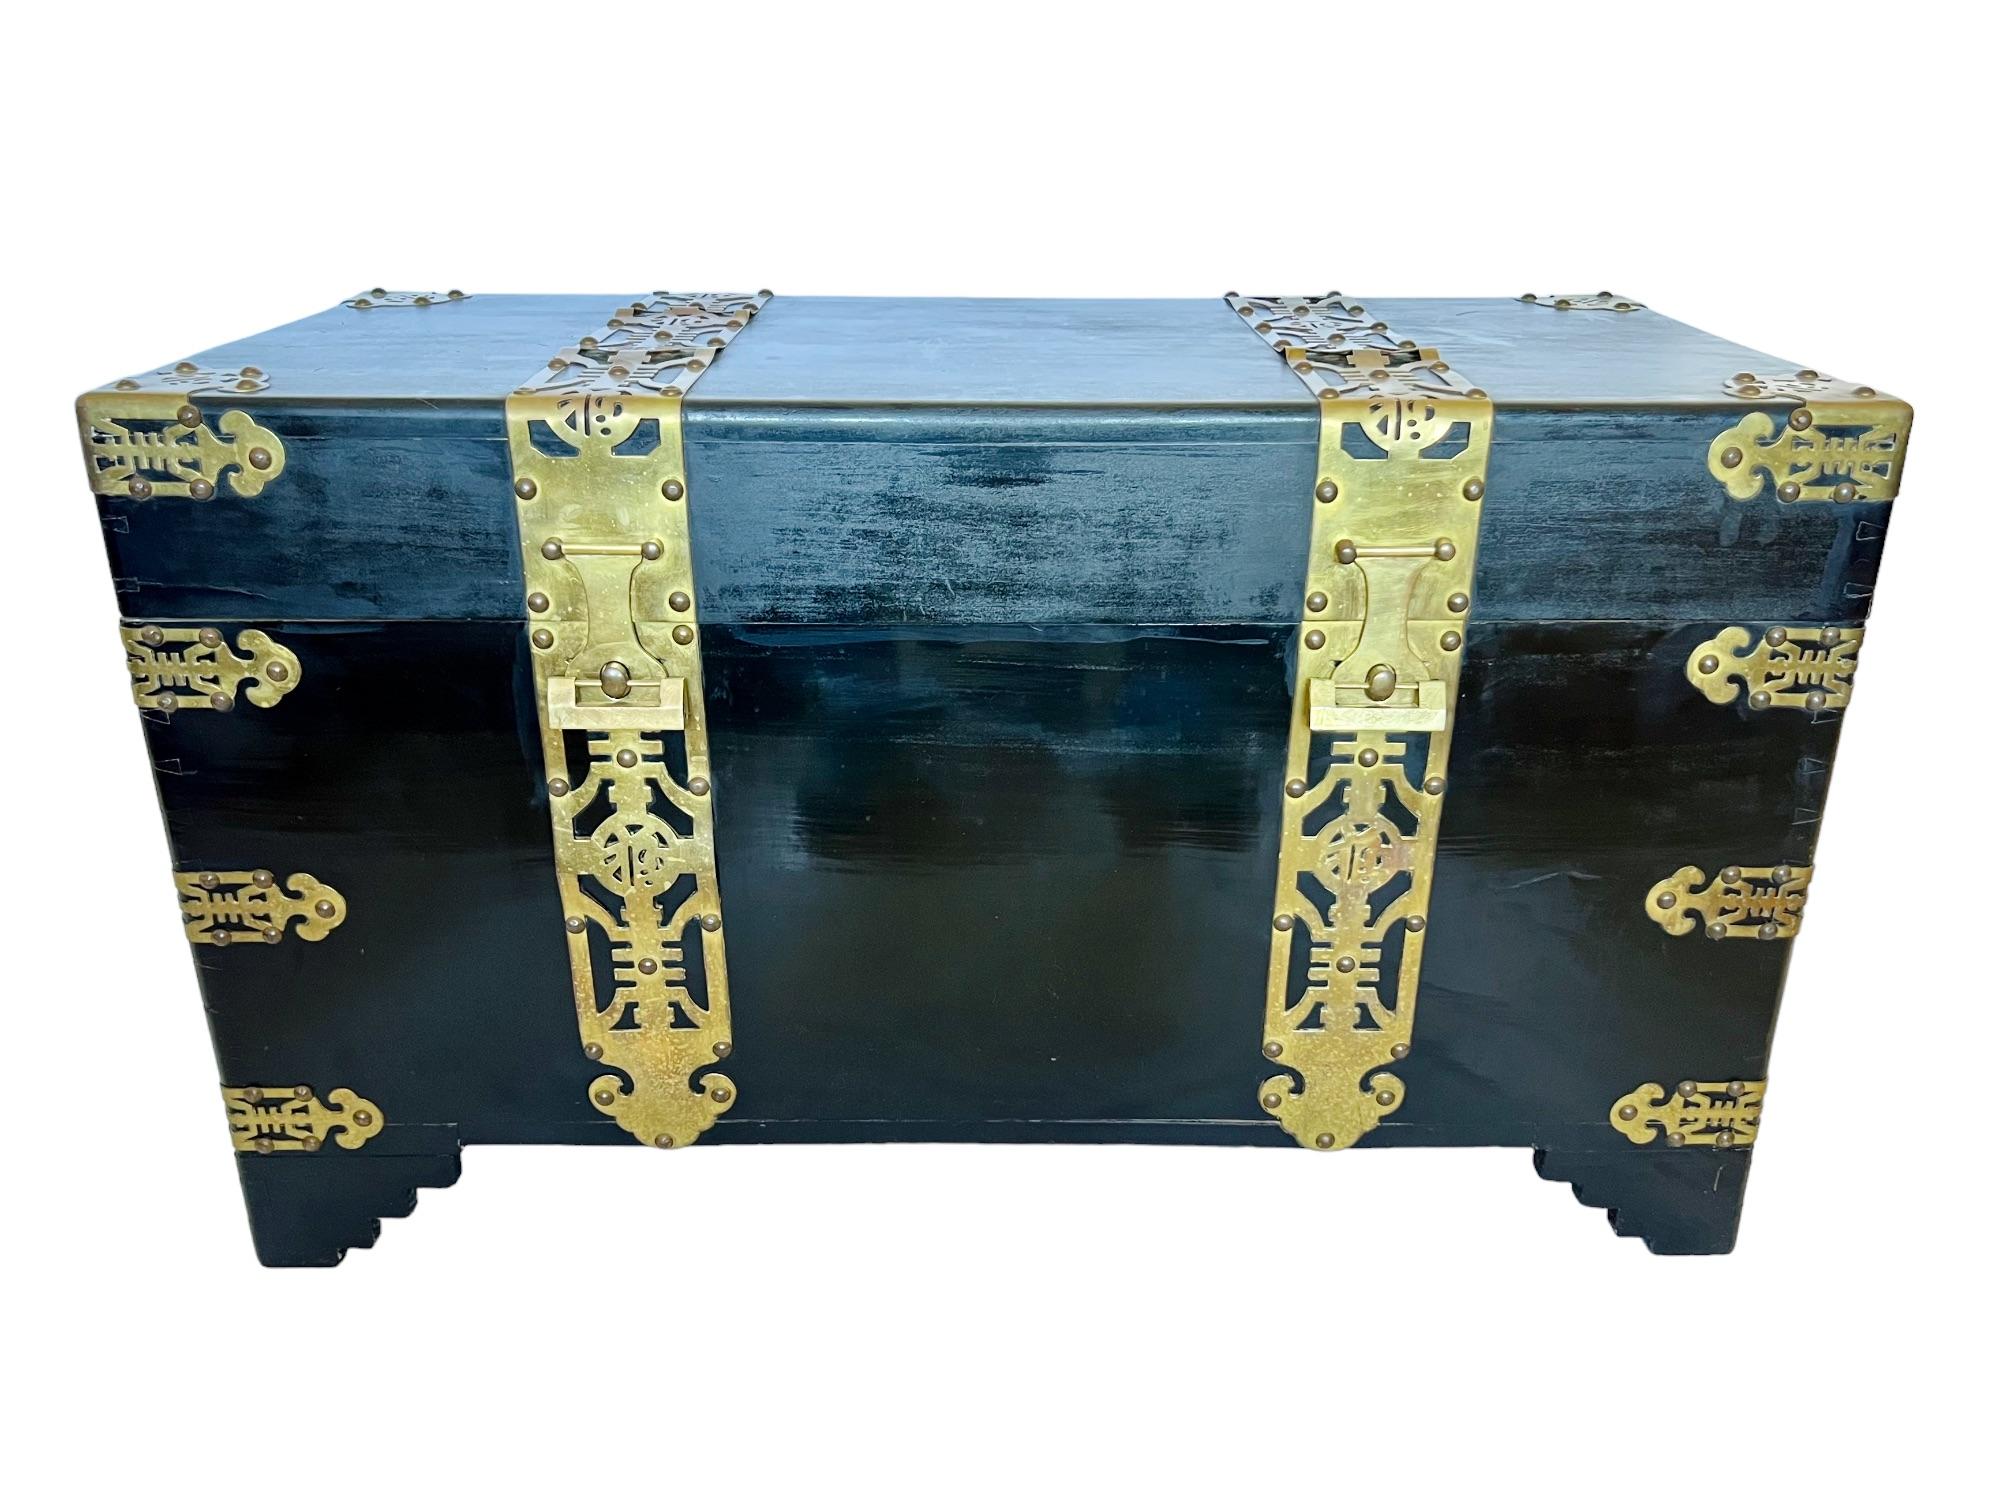 This striking early 20th century Chinese trunk or blanket chest is bound in brass and features a black lacquer finish, dovetail construction, medallion backplate side handles and dual latches with traditional brass locks and a key. It is lined in